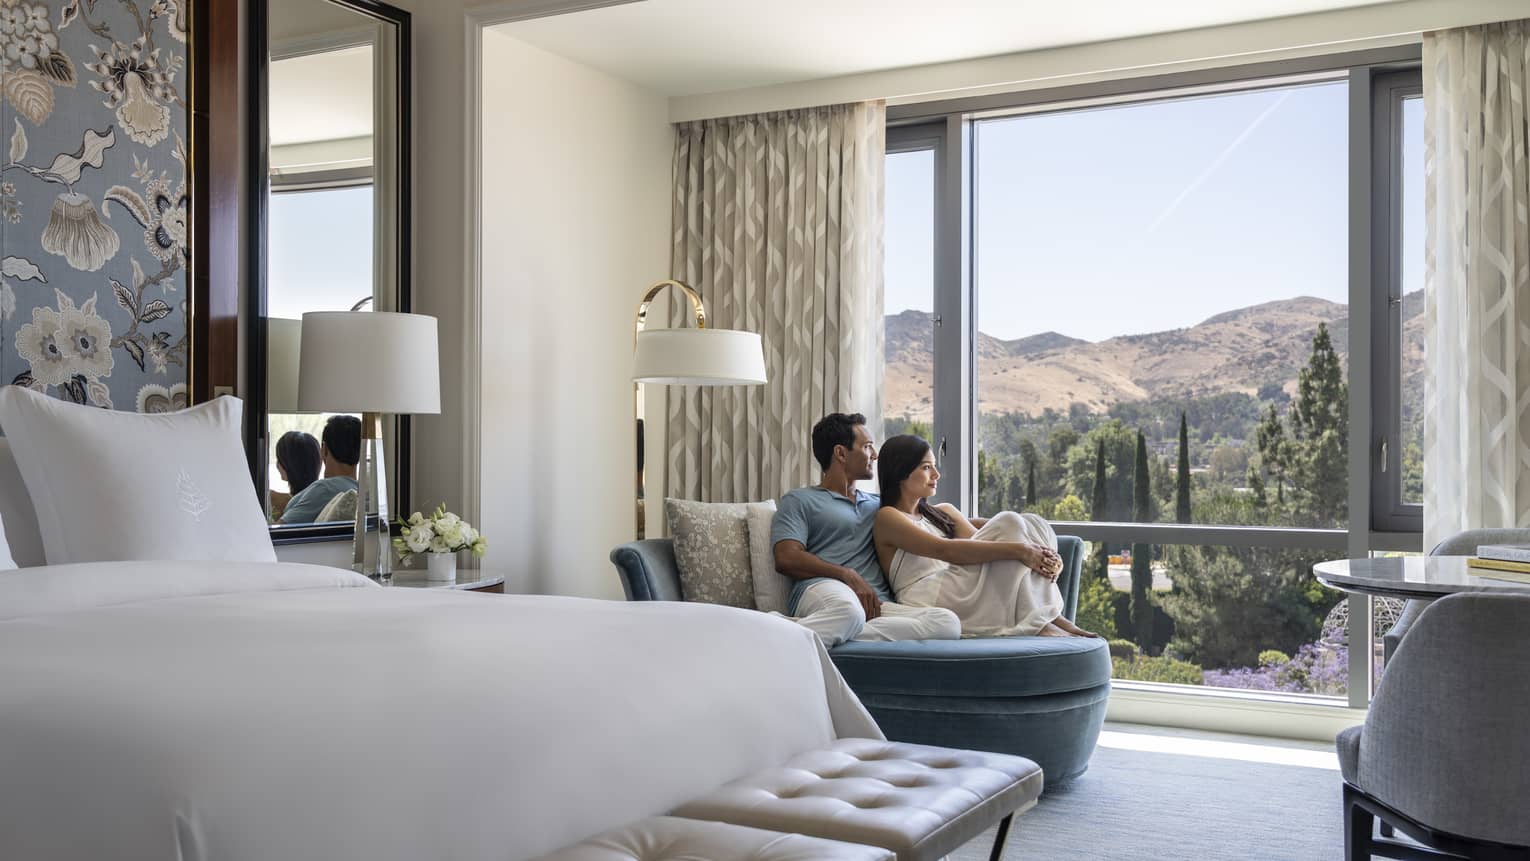 A couple lounging on a chair in their hotel room looking out at the mountains.